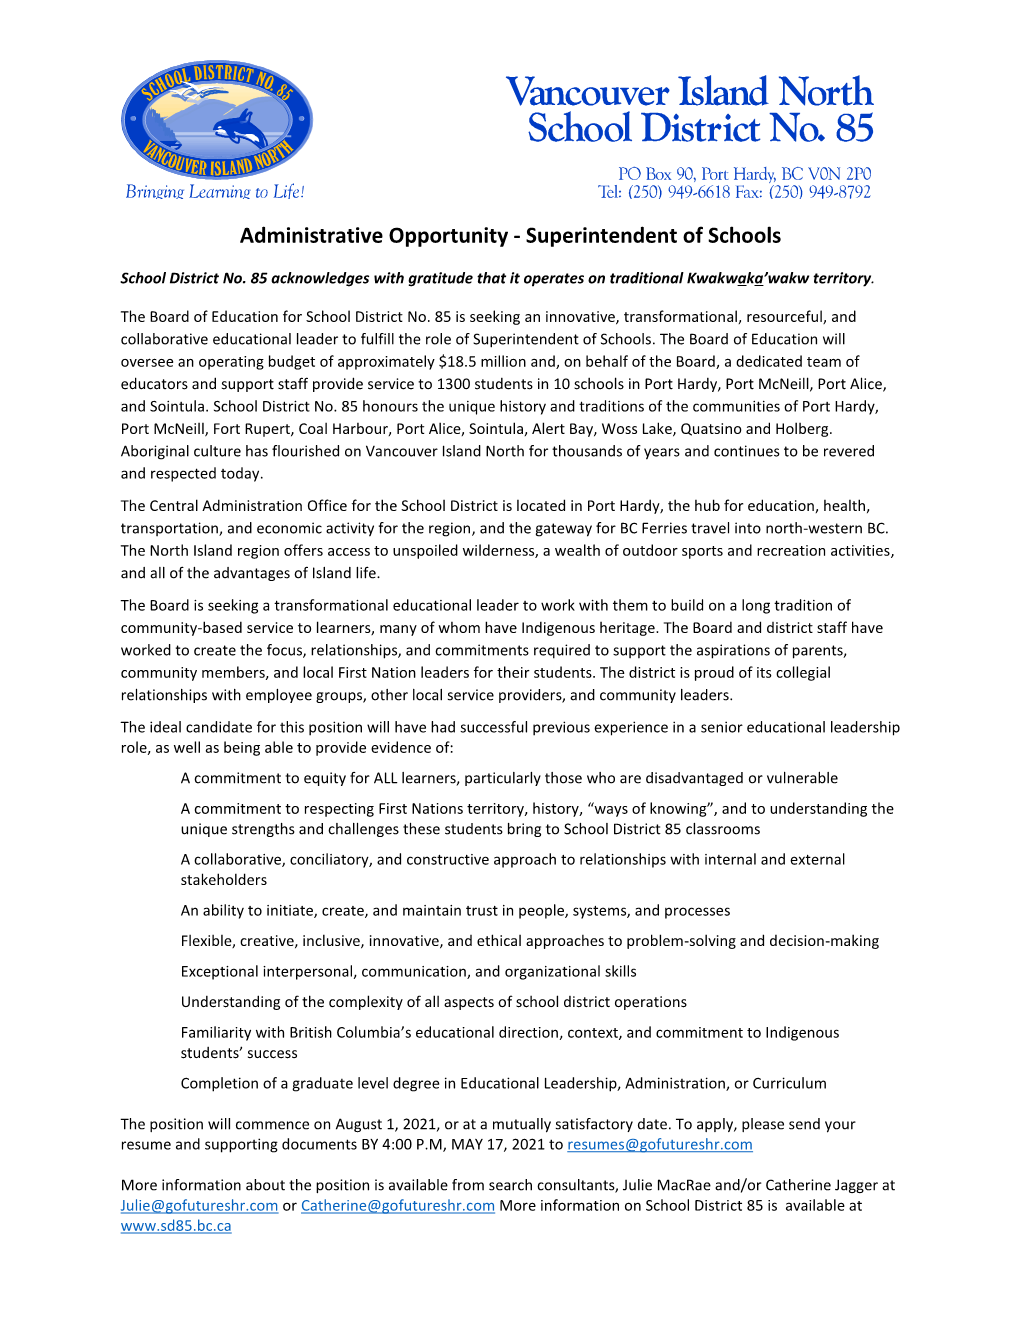 Administrative Opportunity - Superintendent of Schools